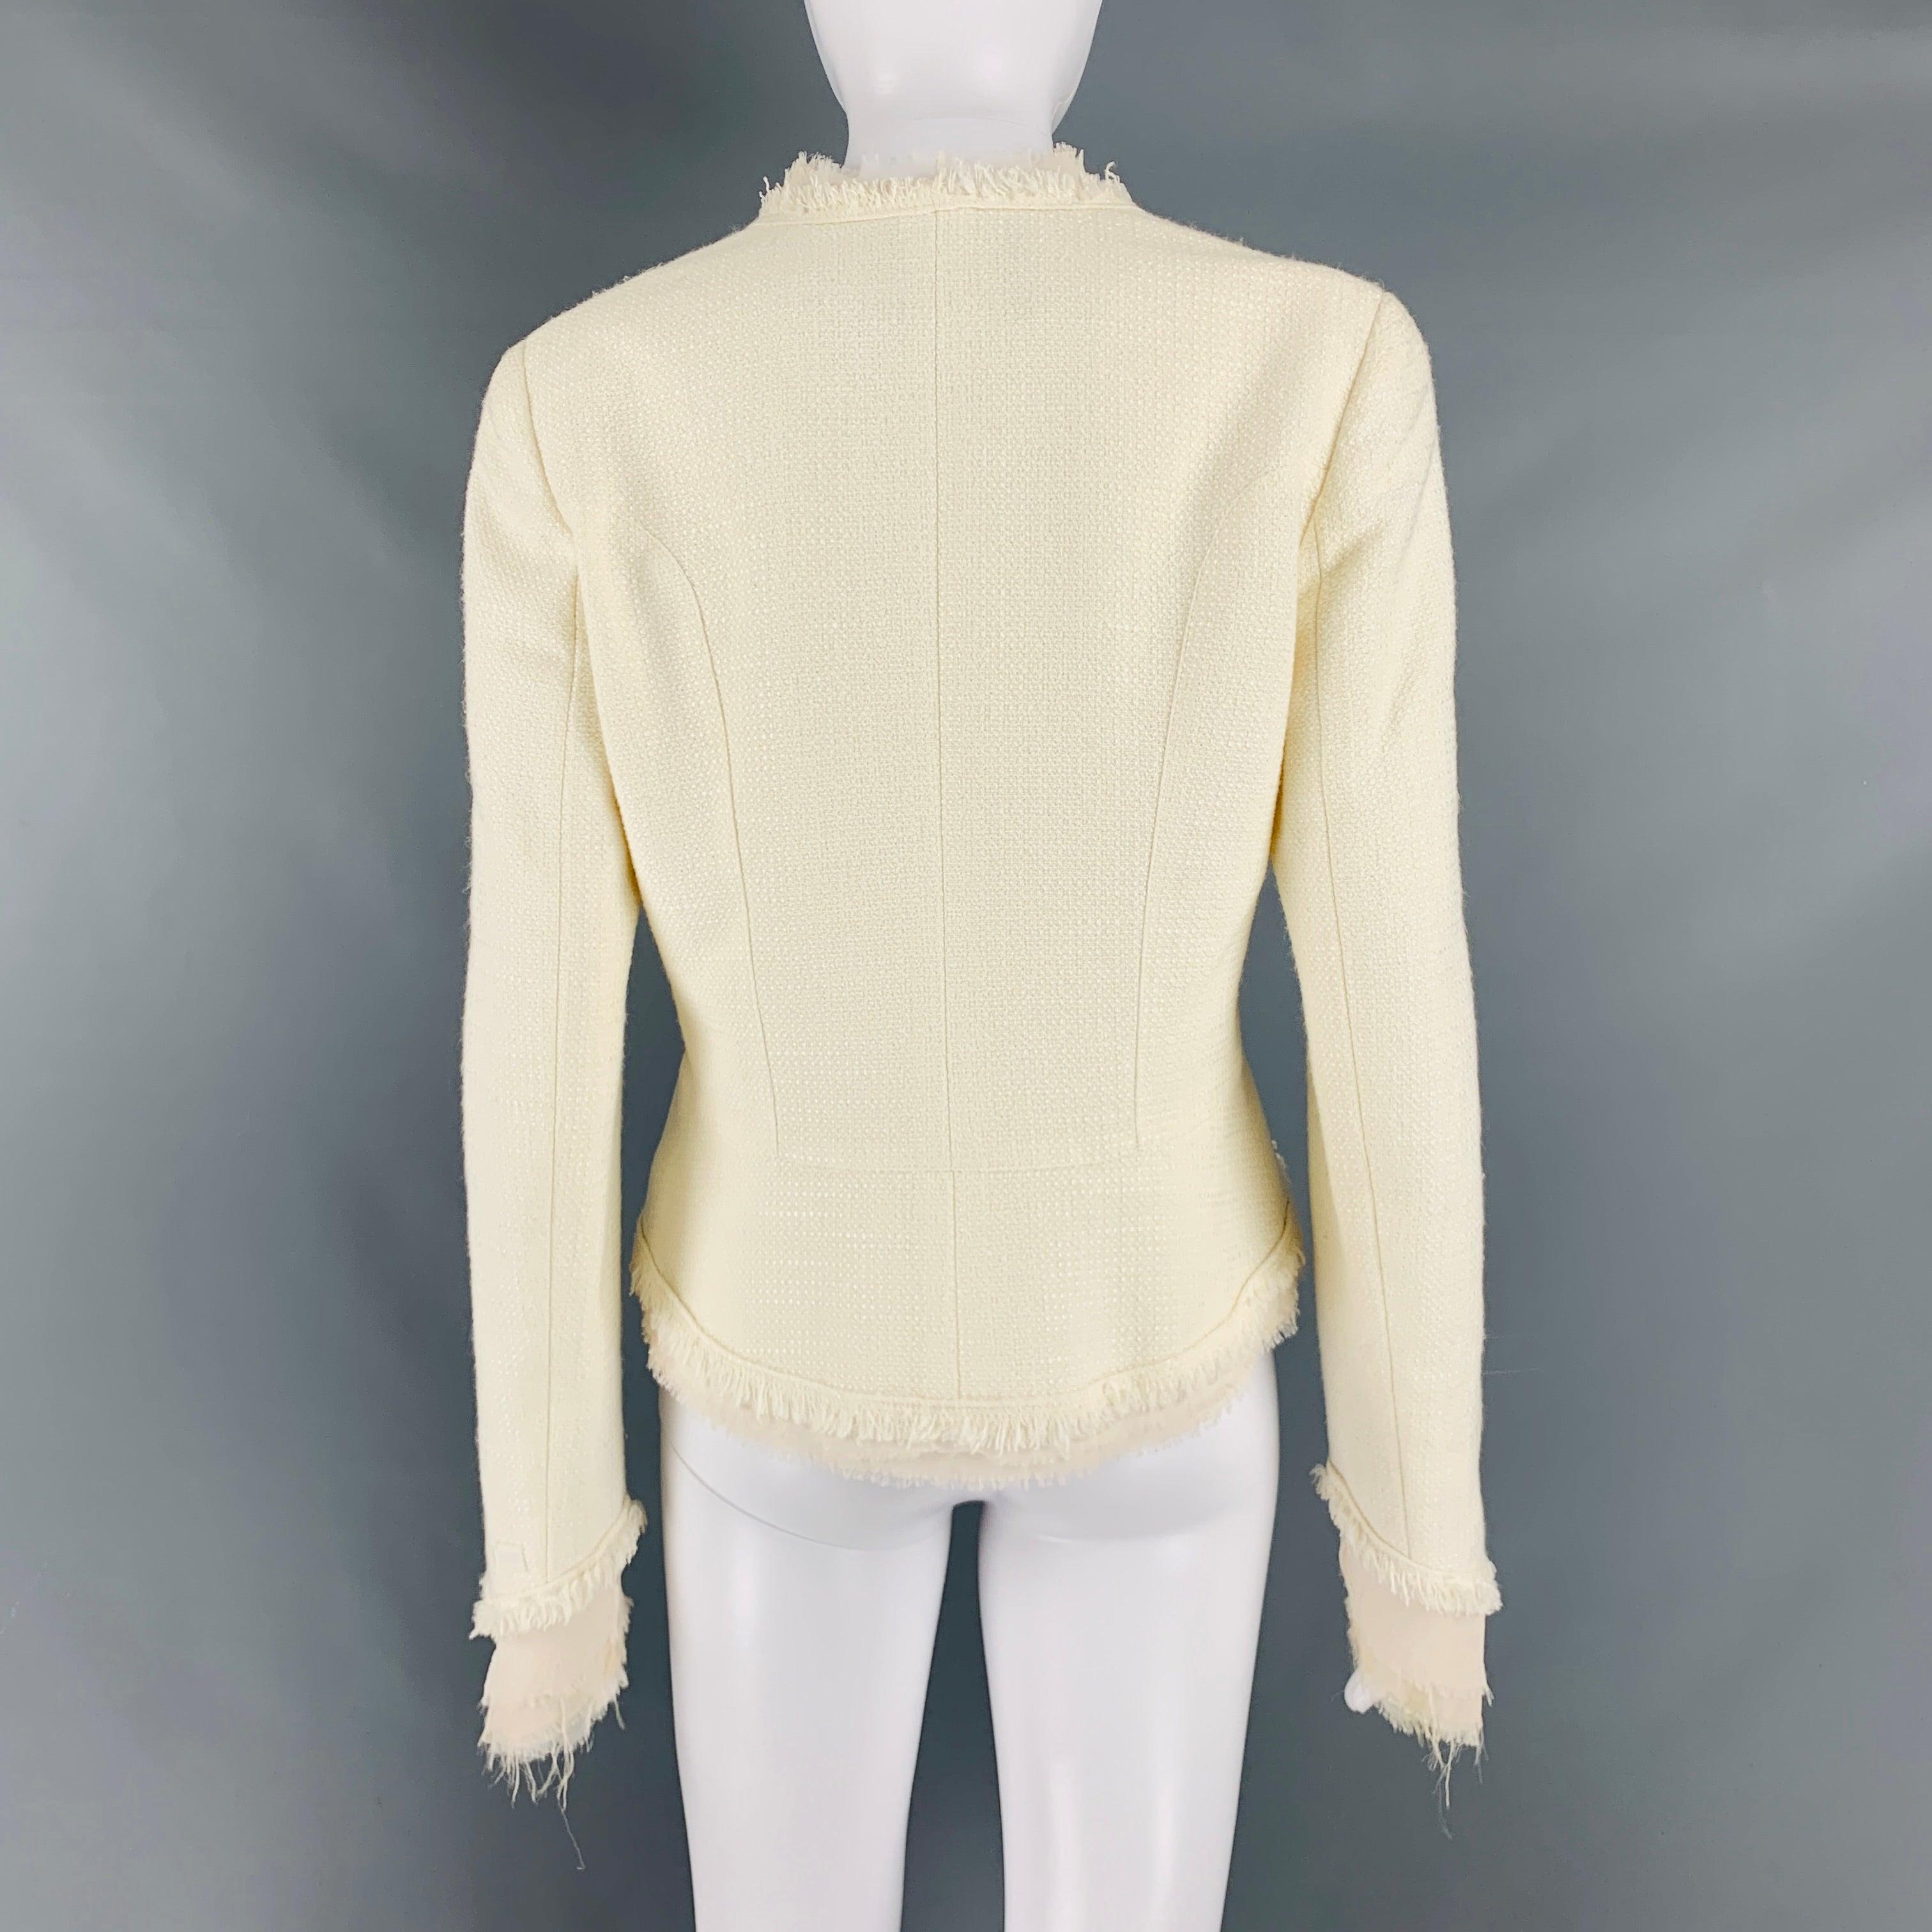 CHANEL Size 8 Cream Cotton Acrylic Textured Jacket In Good Condition For Sale In San Francisco, CA